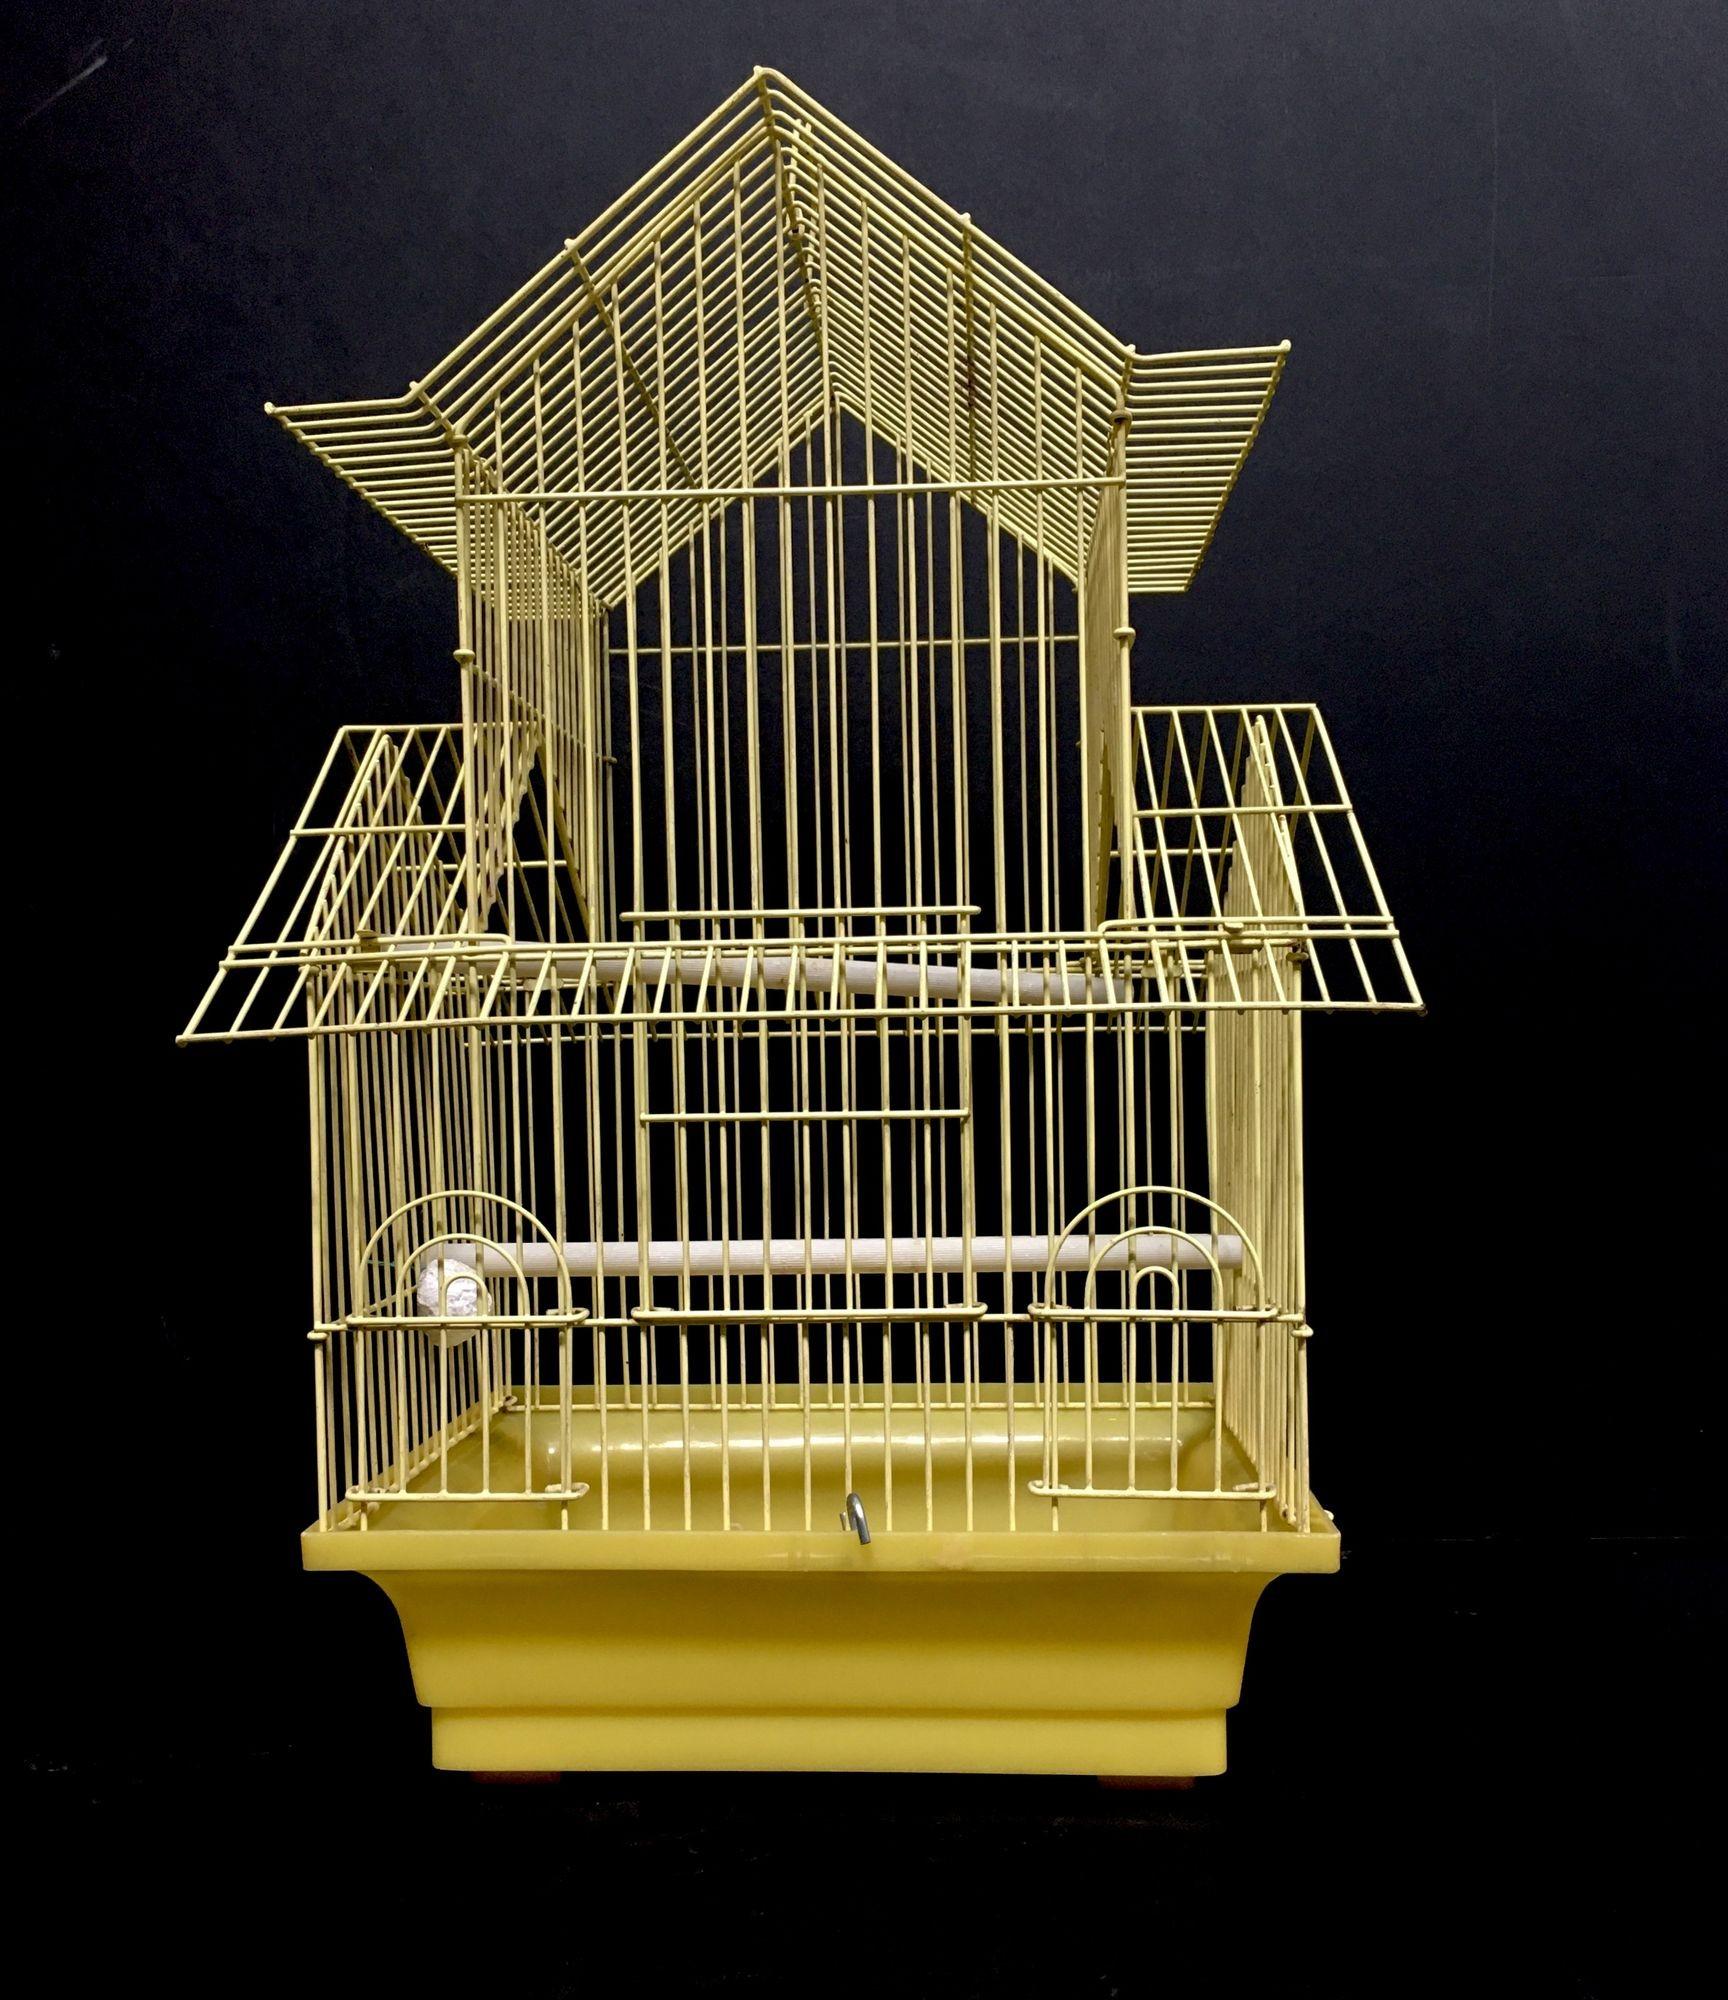 Vintage wire house birdcage double roof in yellow with accessories. $145
 
This wire birdcage comes with 2 plastic perches, removable grille and pullout debris tray which makes it for an easy cleaning process. The wire has been powder coated for a